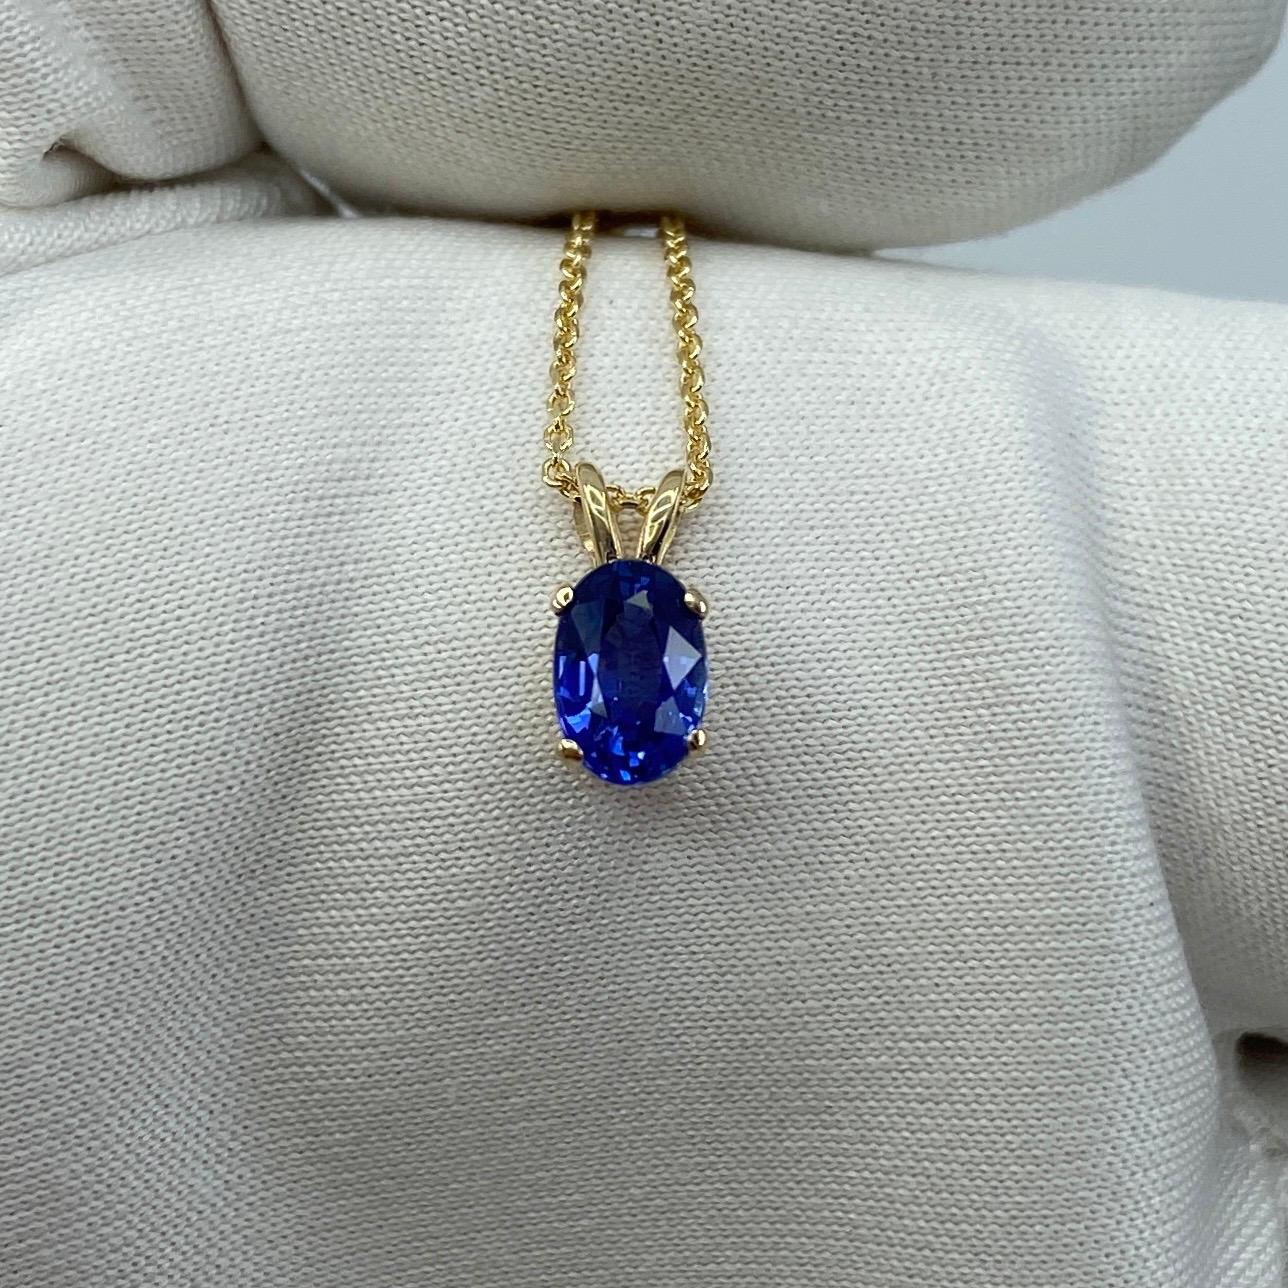 Vivid Blue Sapphire 14k Yellow Gold Solitaire Pendant.

0.71 Carat sapphire with a stunning fine vivid blue colour and an excellent oval cut. The sapphire also has excellent clarity, very clean stone. Measures just over 6x4mm. Set in a beautiful 14k